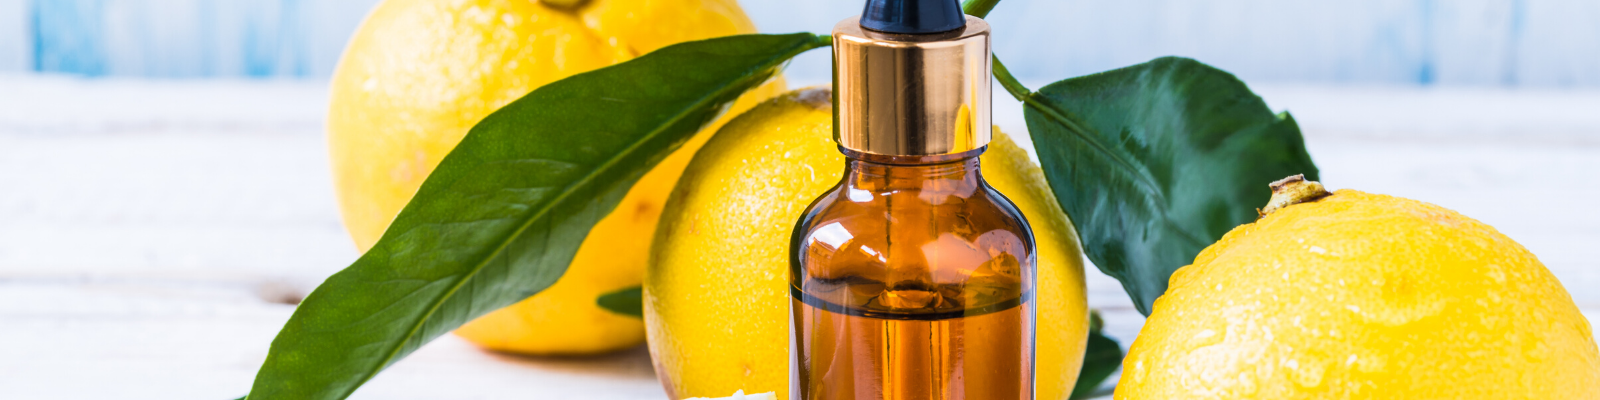 Did You Know Sandalwood Oil Acts As An Energy And Memory Booster?